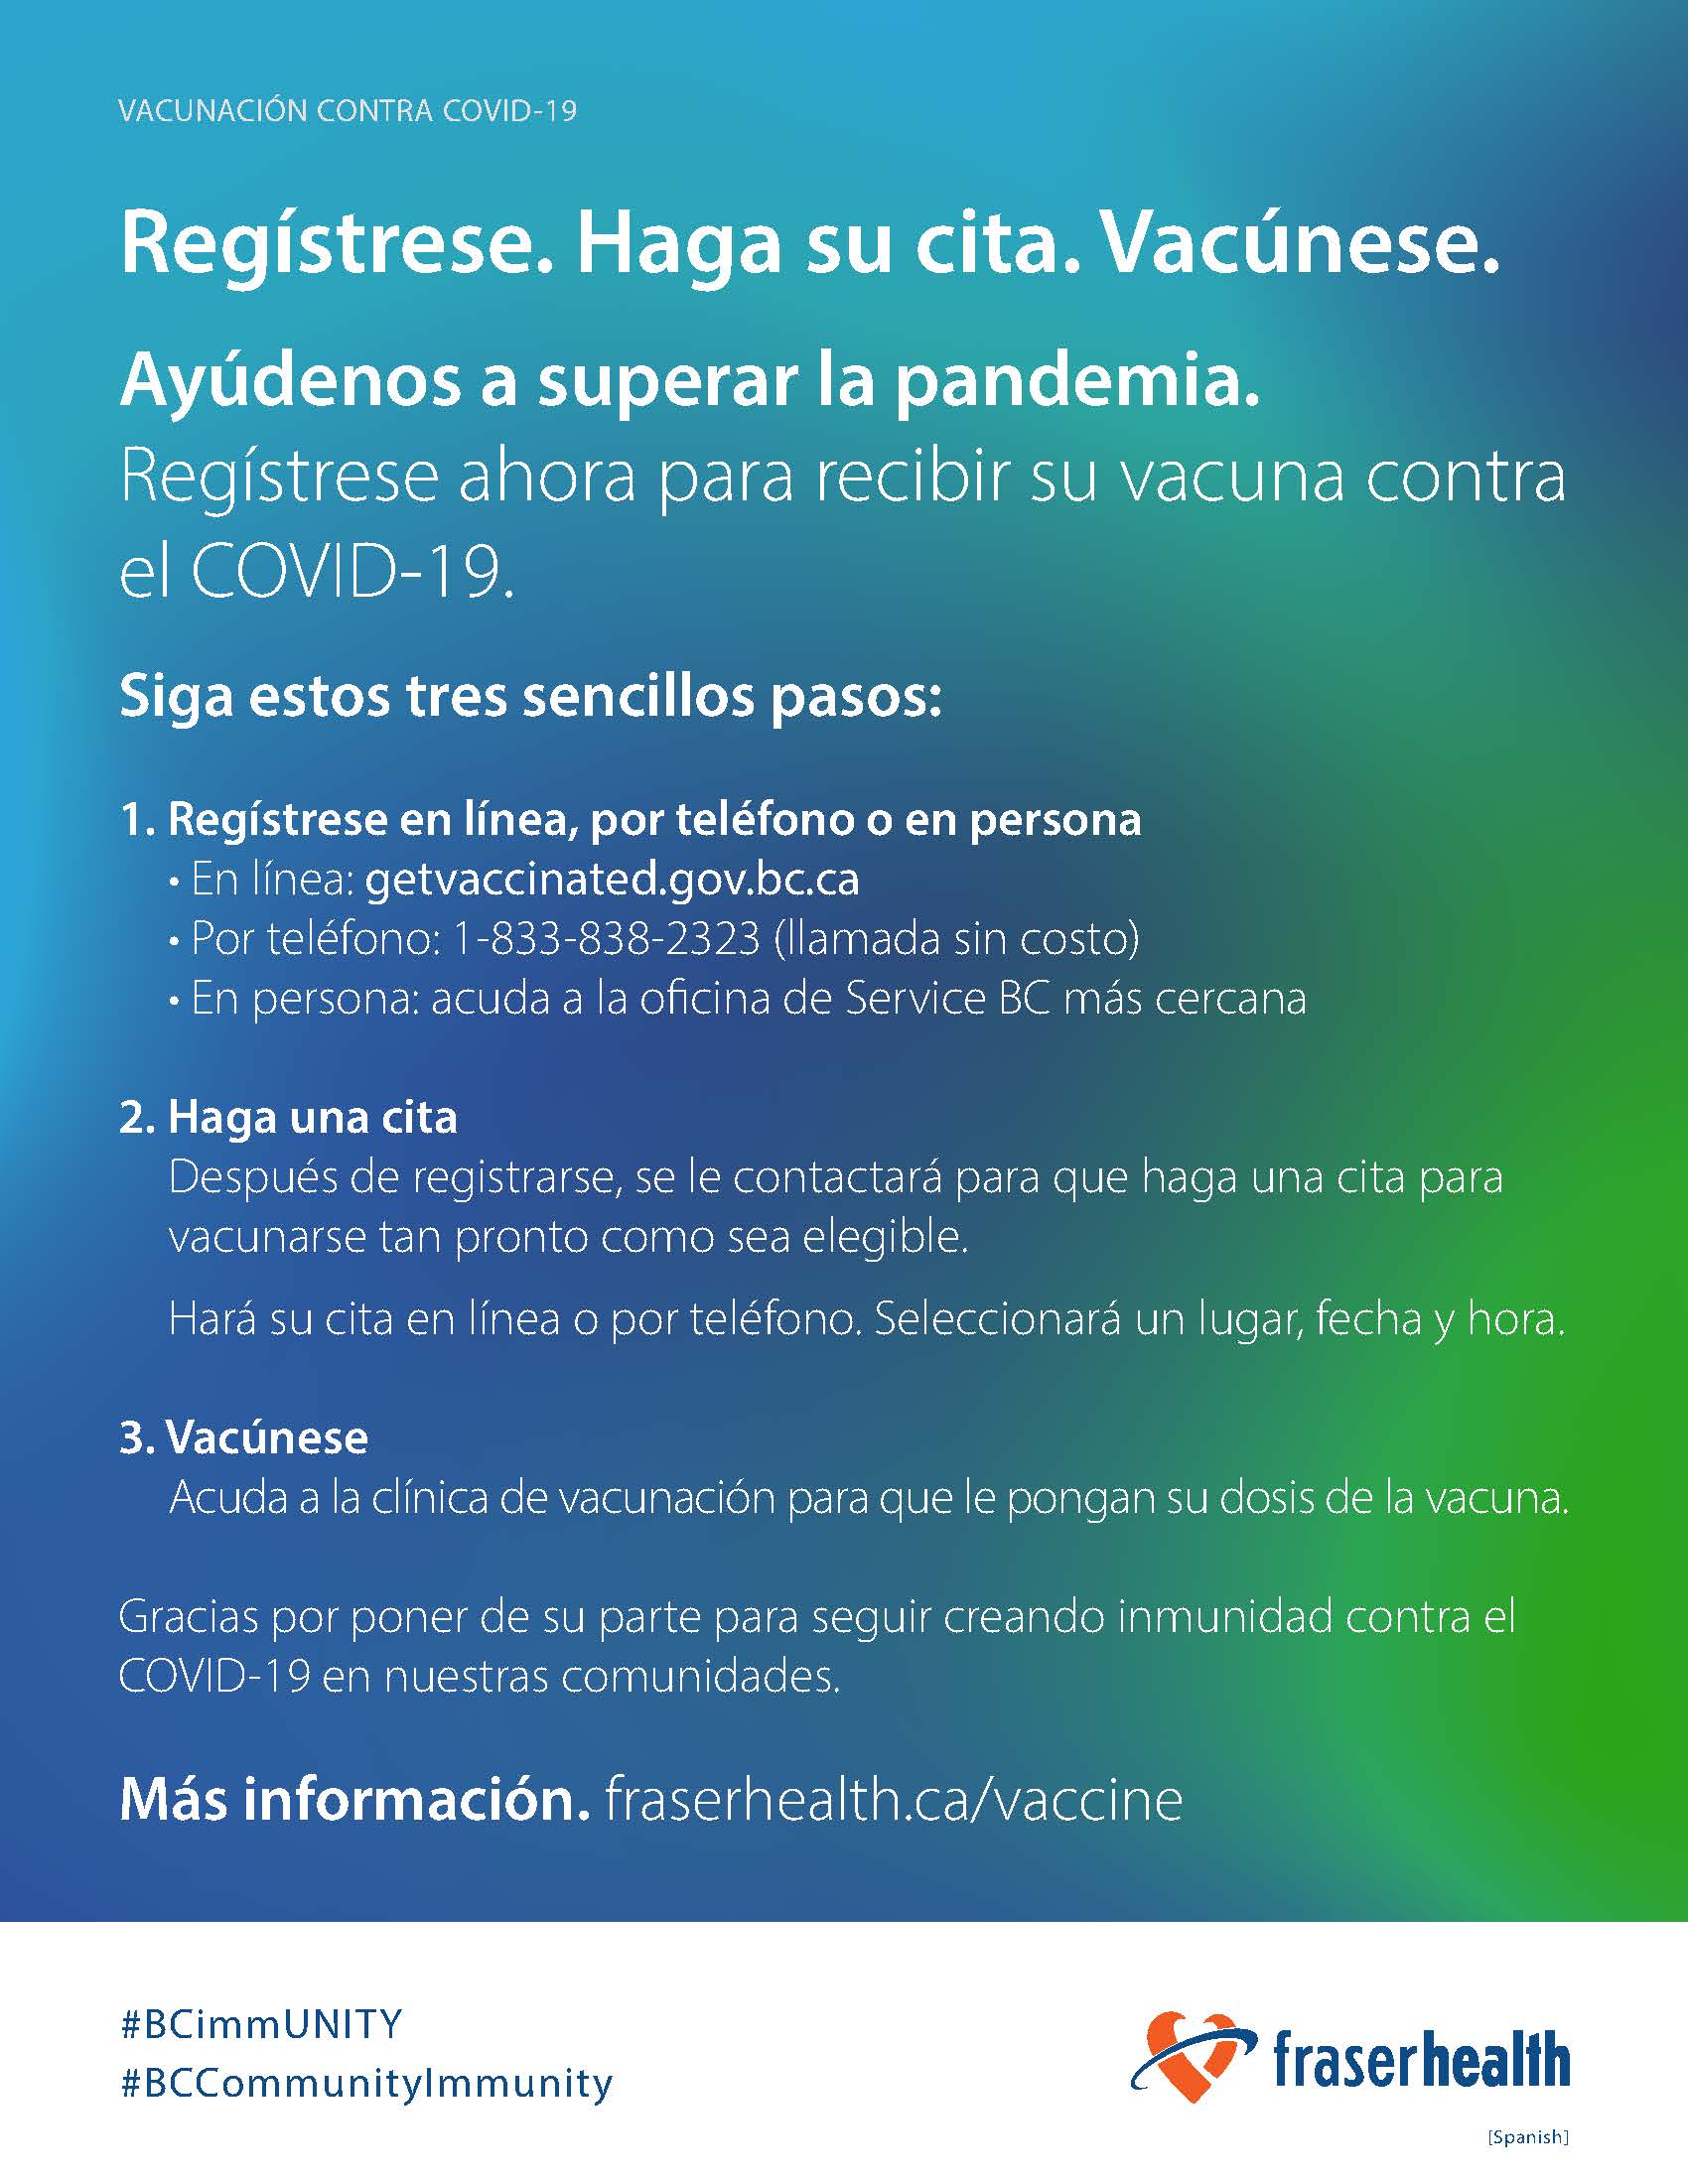 Vaccine registration for Spanish in colour